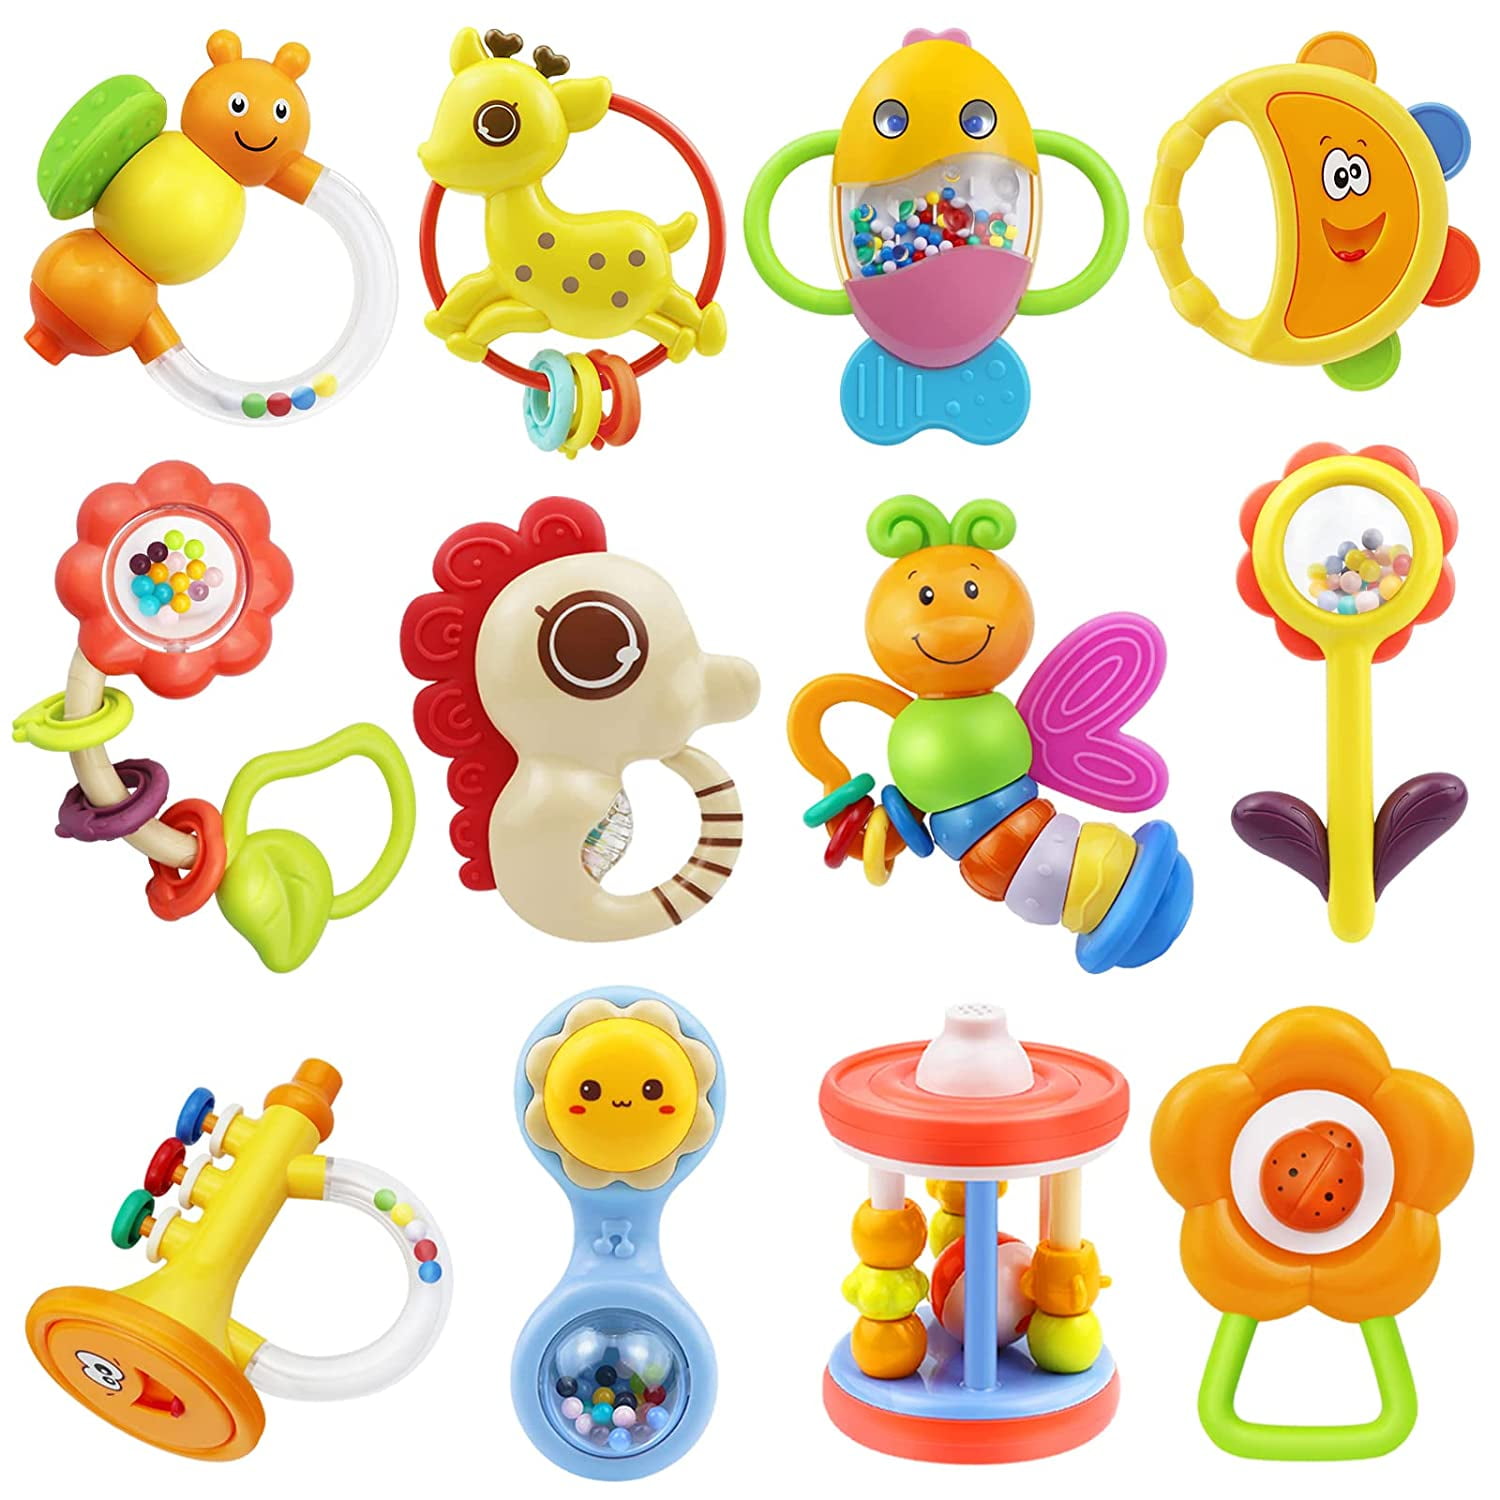 Baby Teether Toys 3 Pcs/Set Teething Toys for Babies 3-12 Months Soft  Silicone Remote Control Shape Teethers Toys for Infants with Tube Teething  Relief Soothe Chew Toys for Babies 3-12 Months